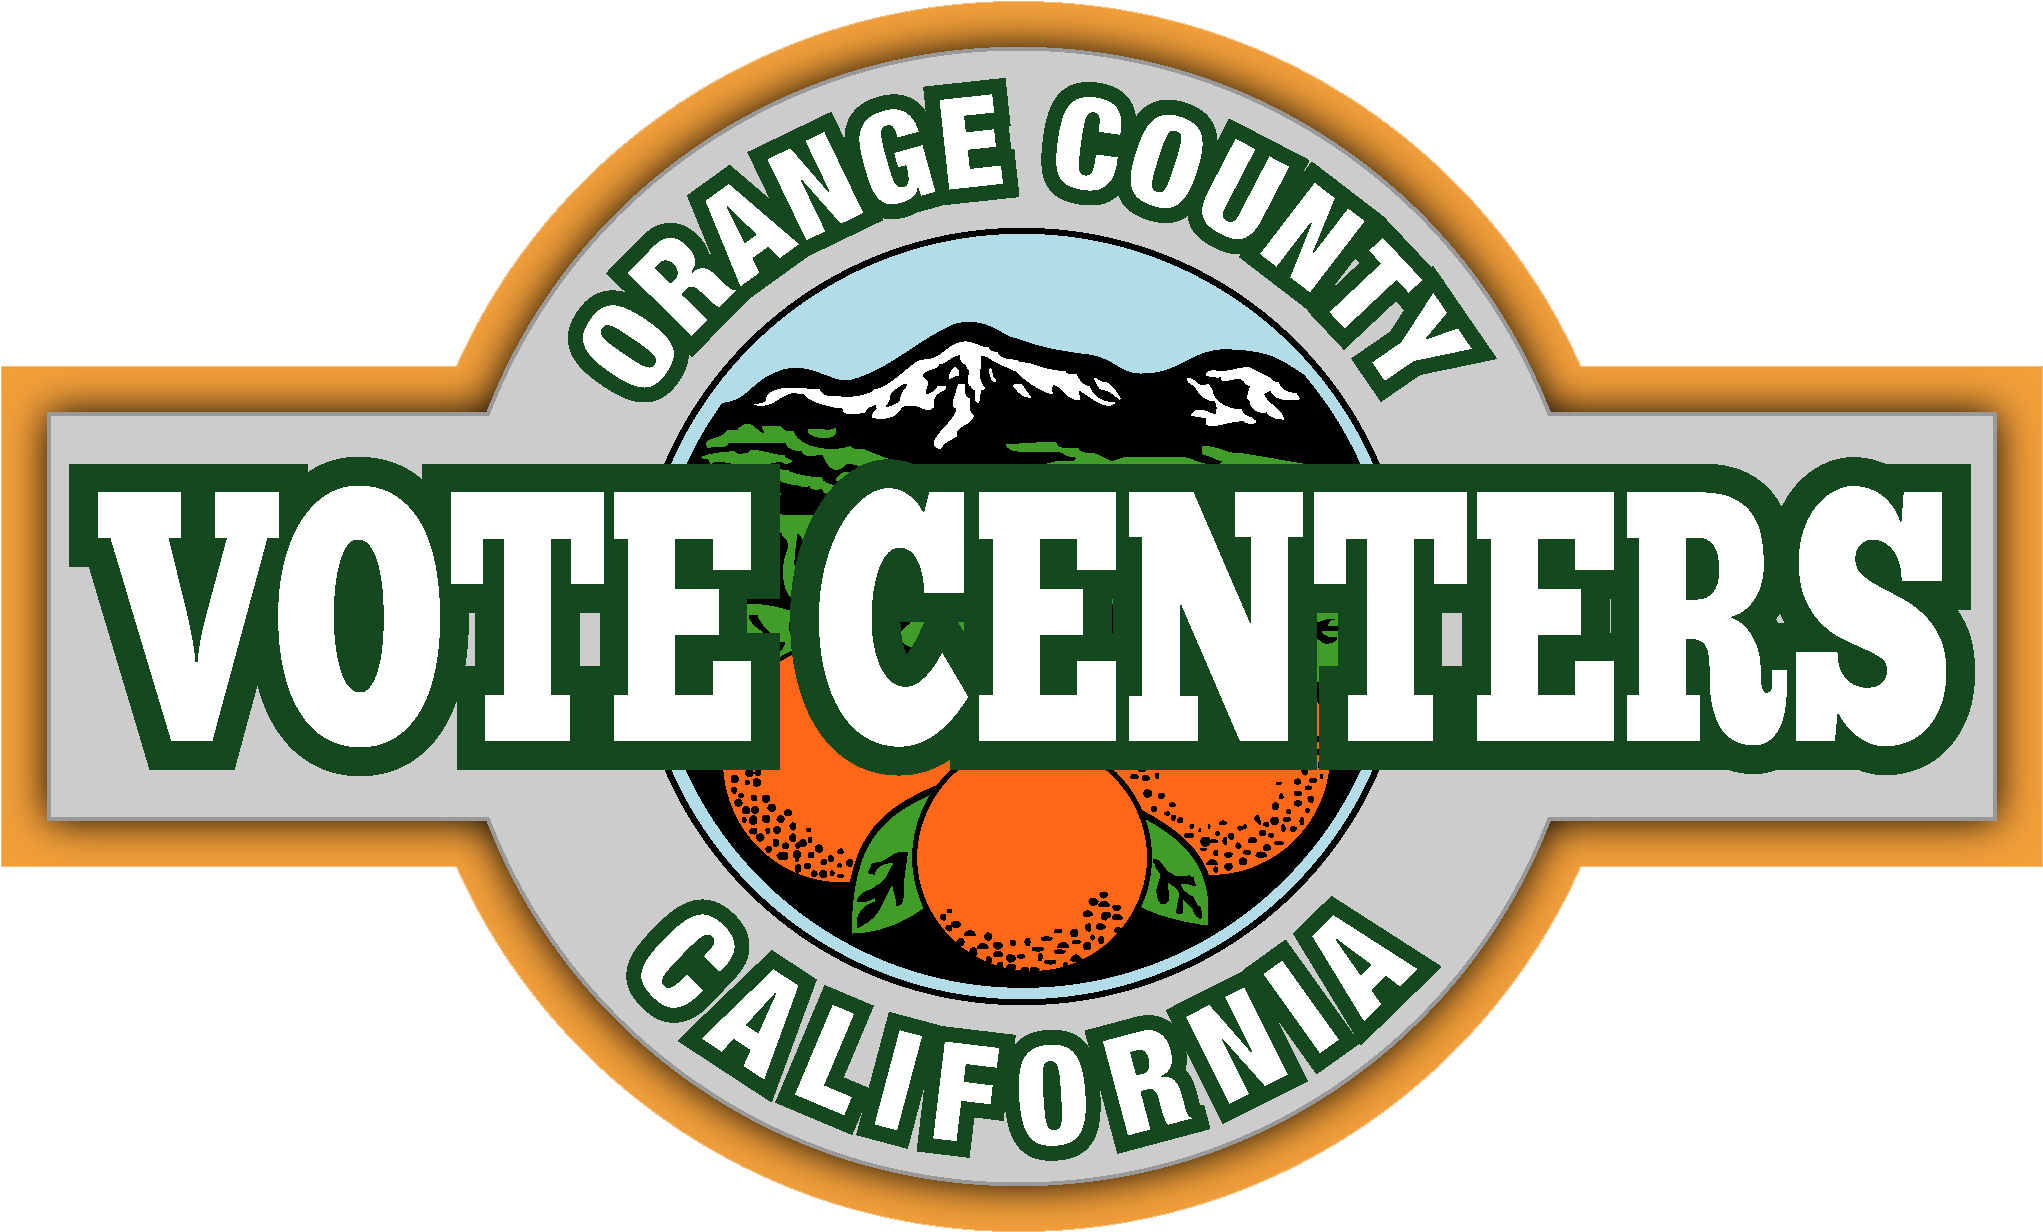 New Orange County Voting Centers, Hd Png Download